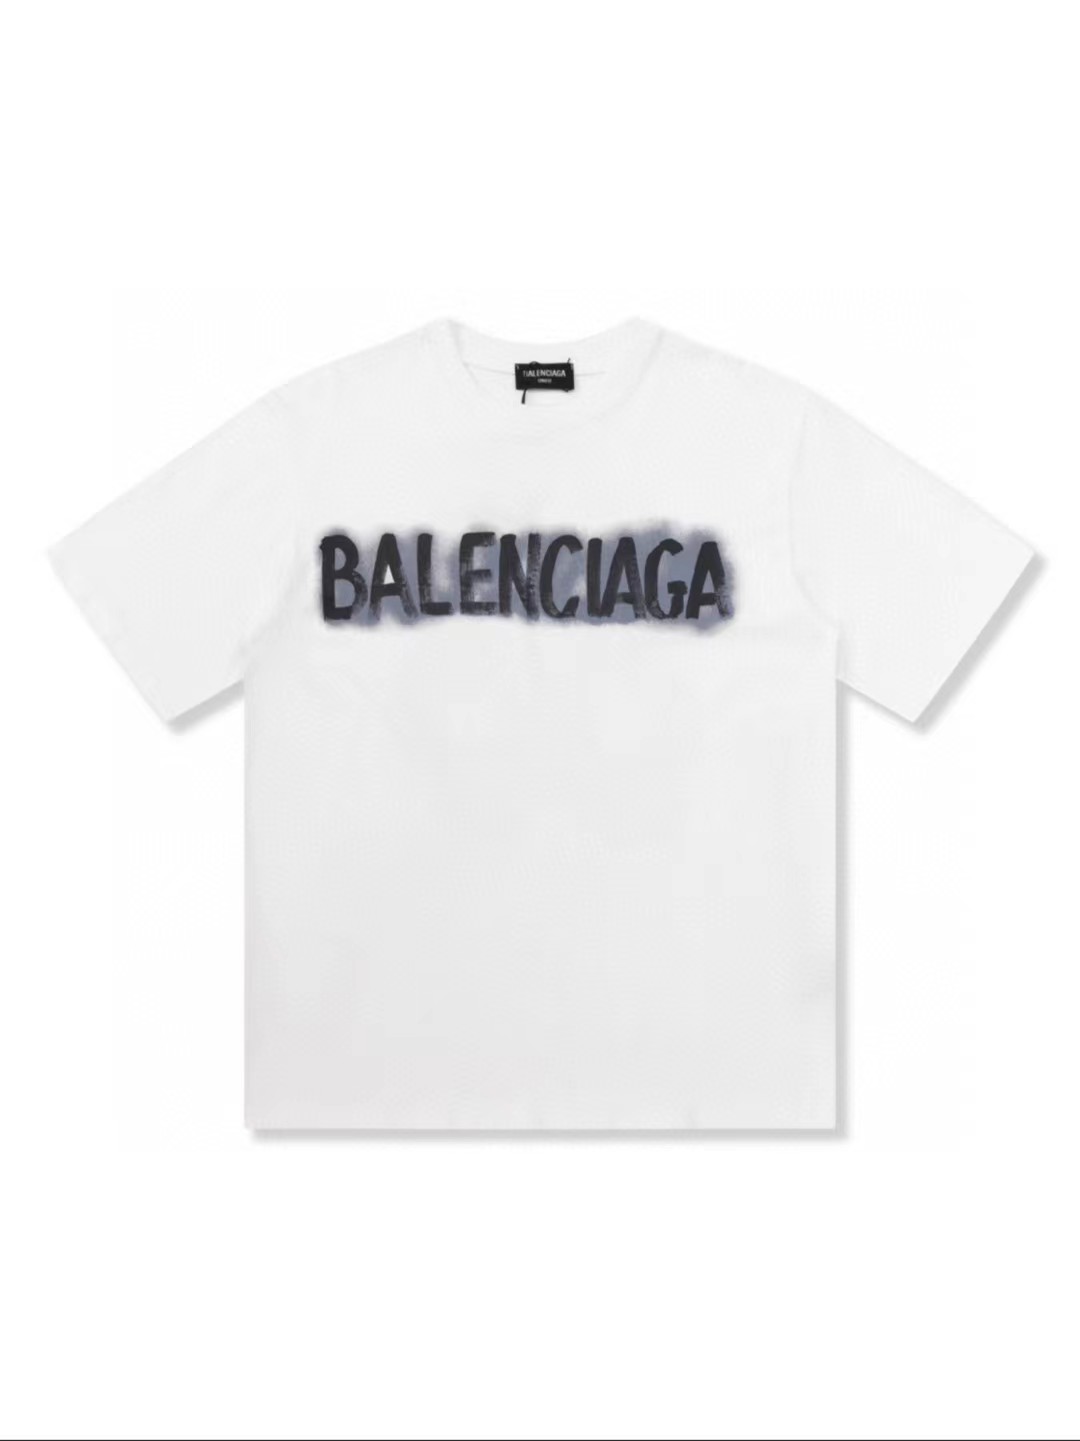 Balenciaga Clothing T-Shirt Fake Cheap best online
 Black Doodle White Printing Combed Cotton Short Sleeve